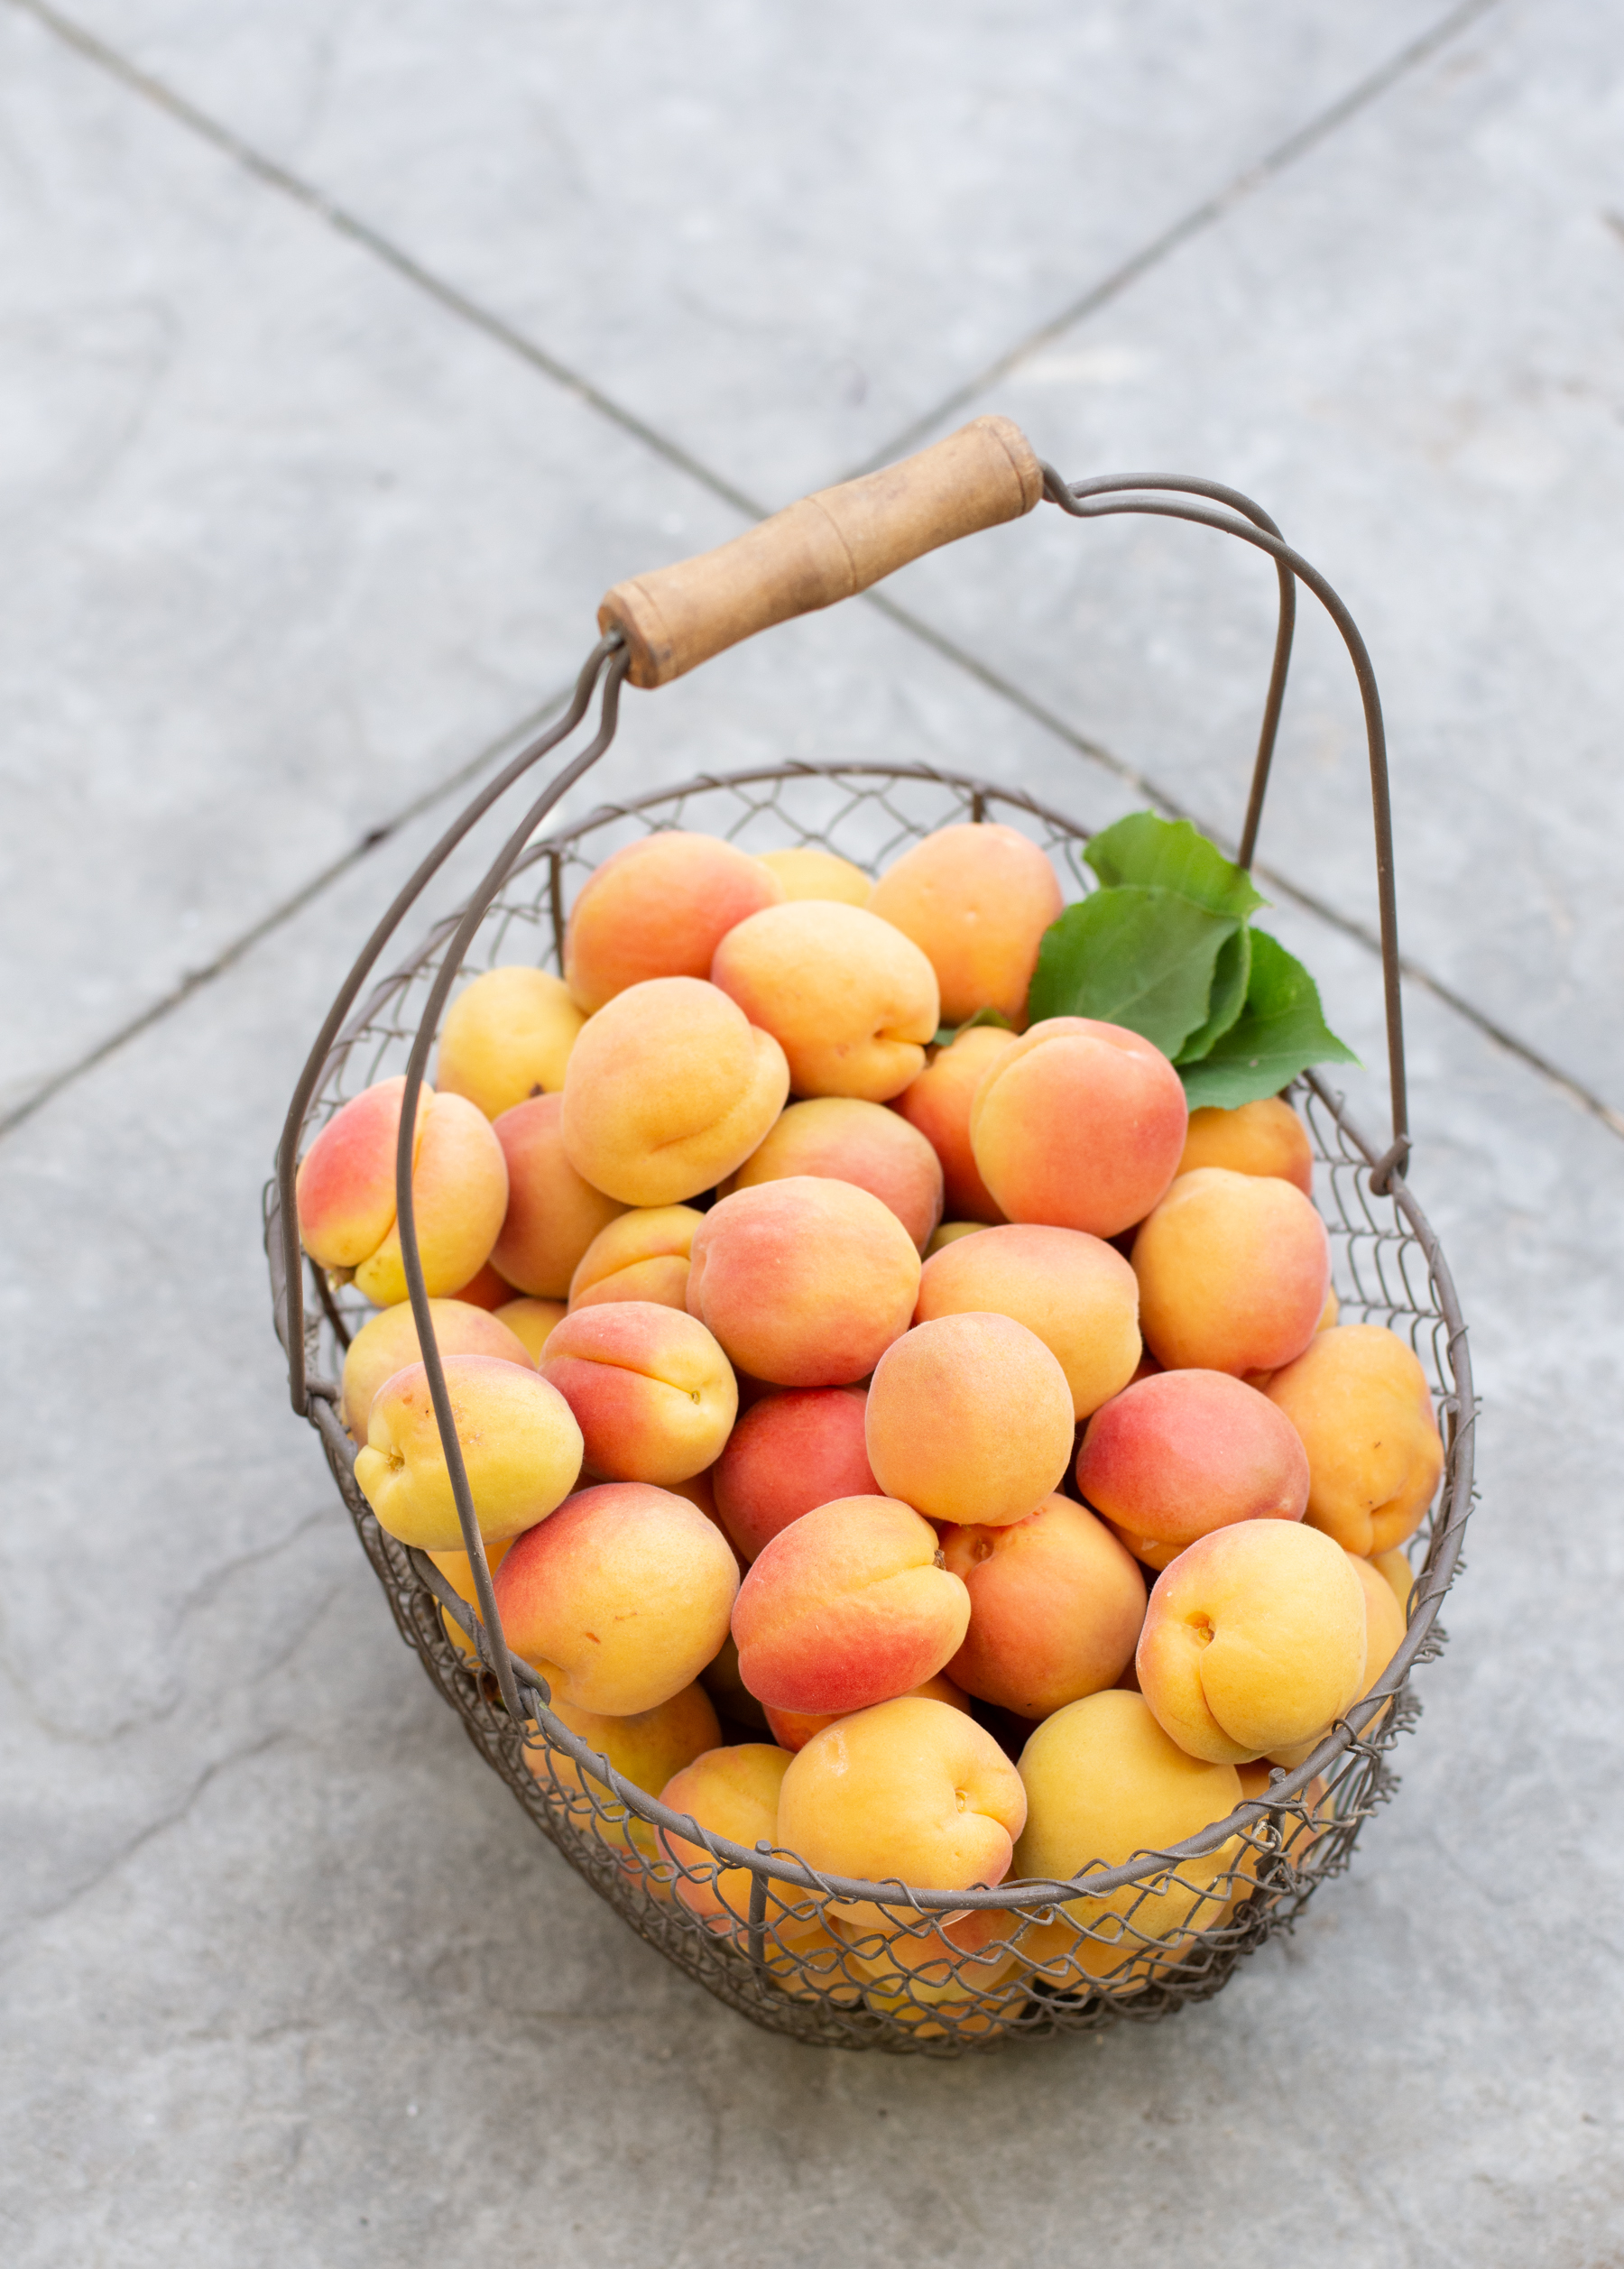 http://theprudenthomemaker.com/wp-content/uploads/2020/05/Apricots-in-May-1-The-Prudent-Homemaker.jpg